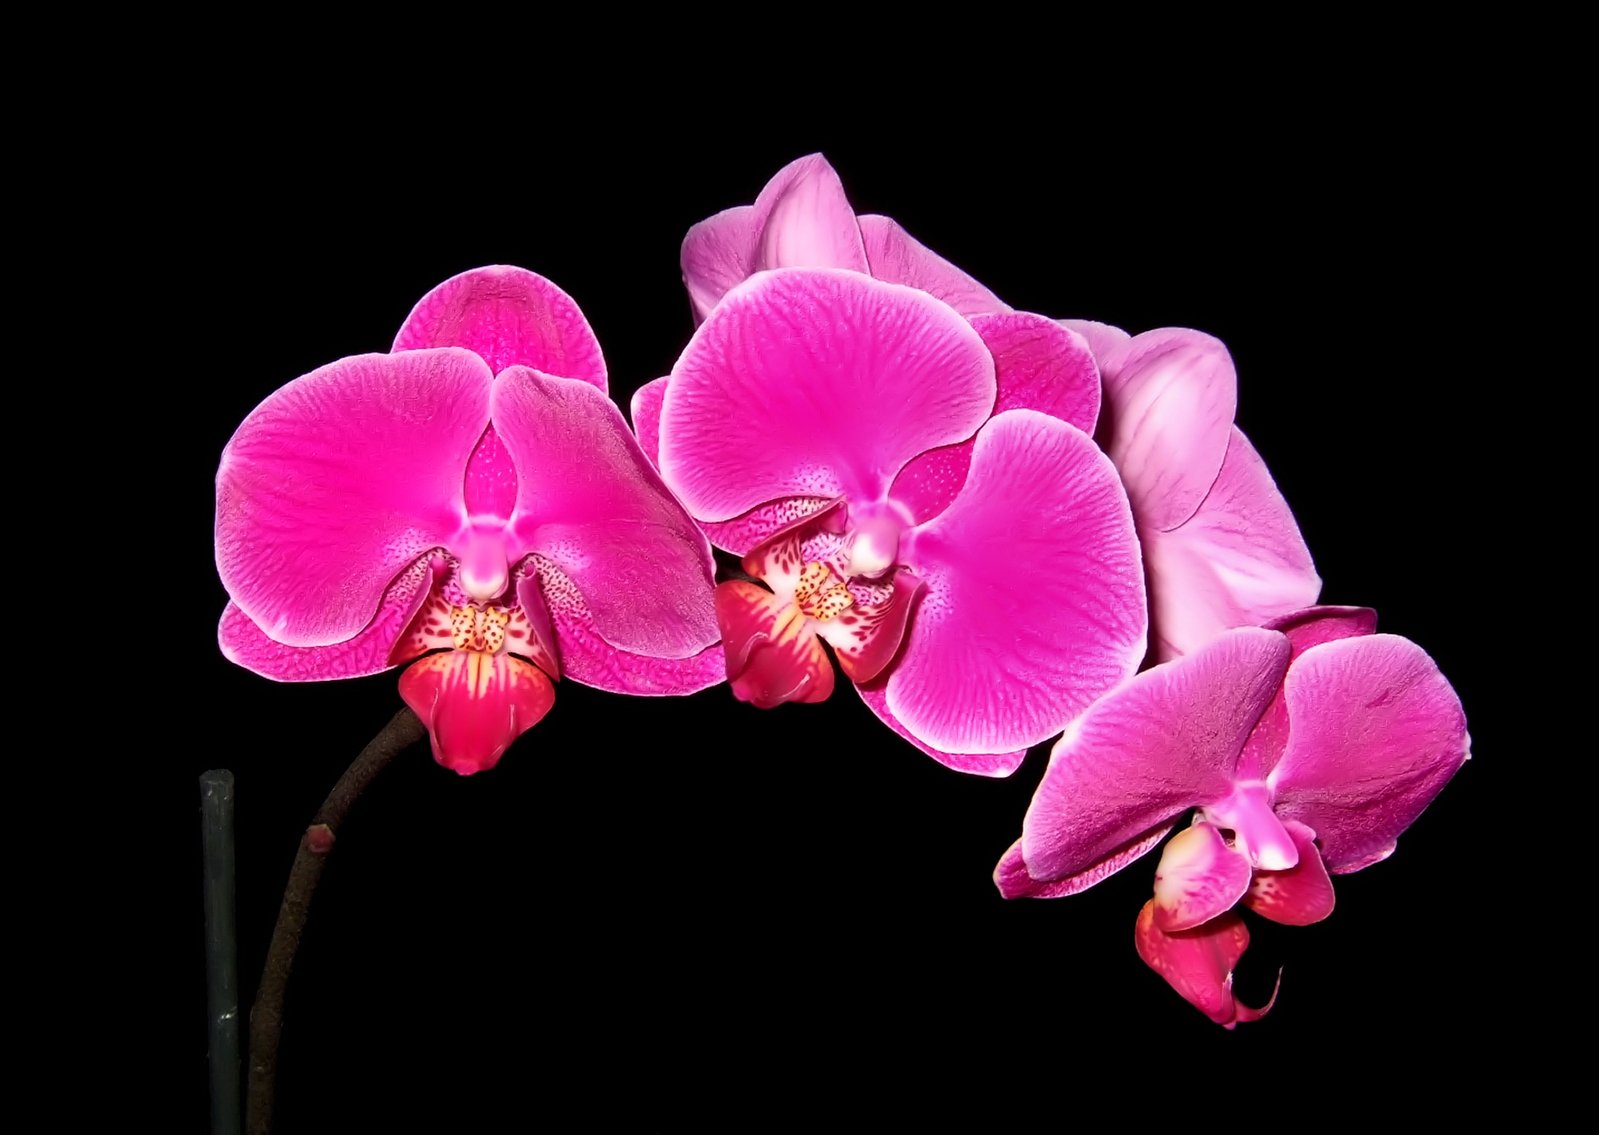 two pink orchids with long stems against a black background